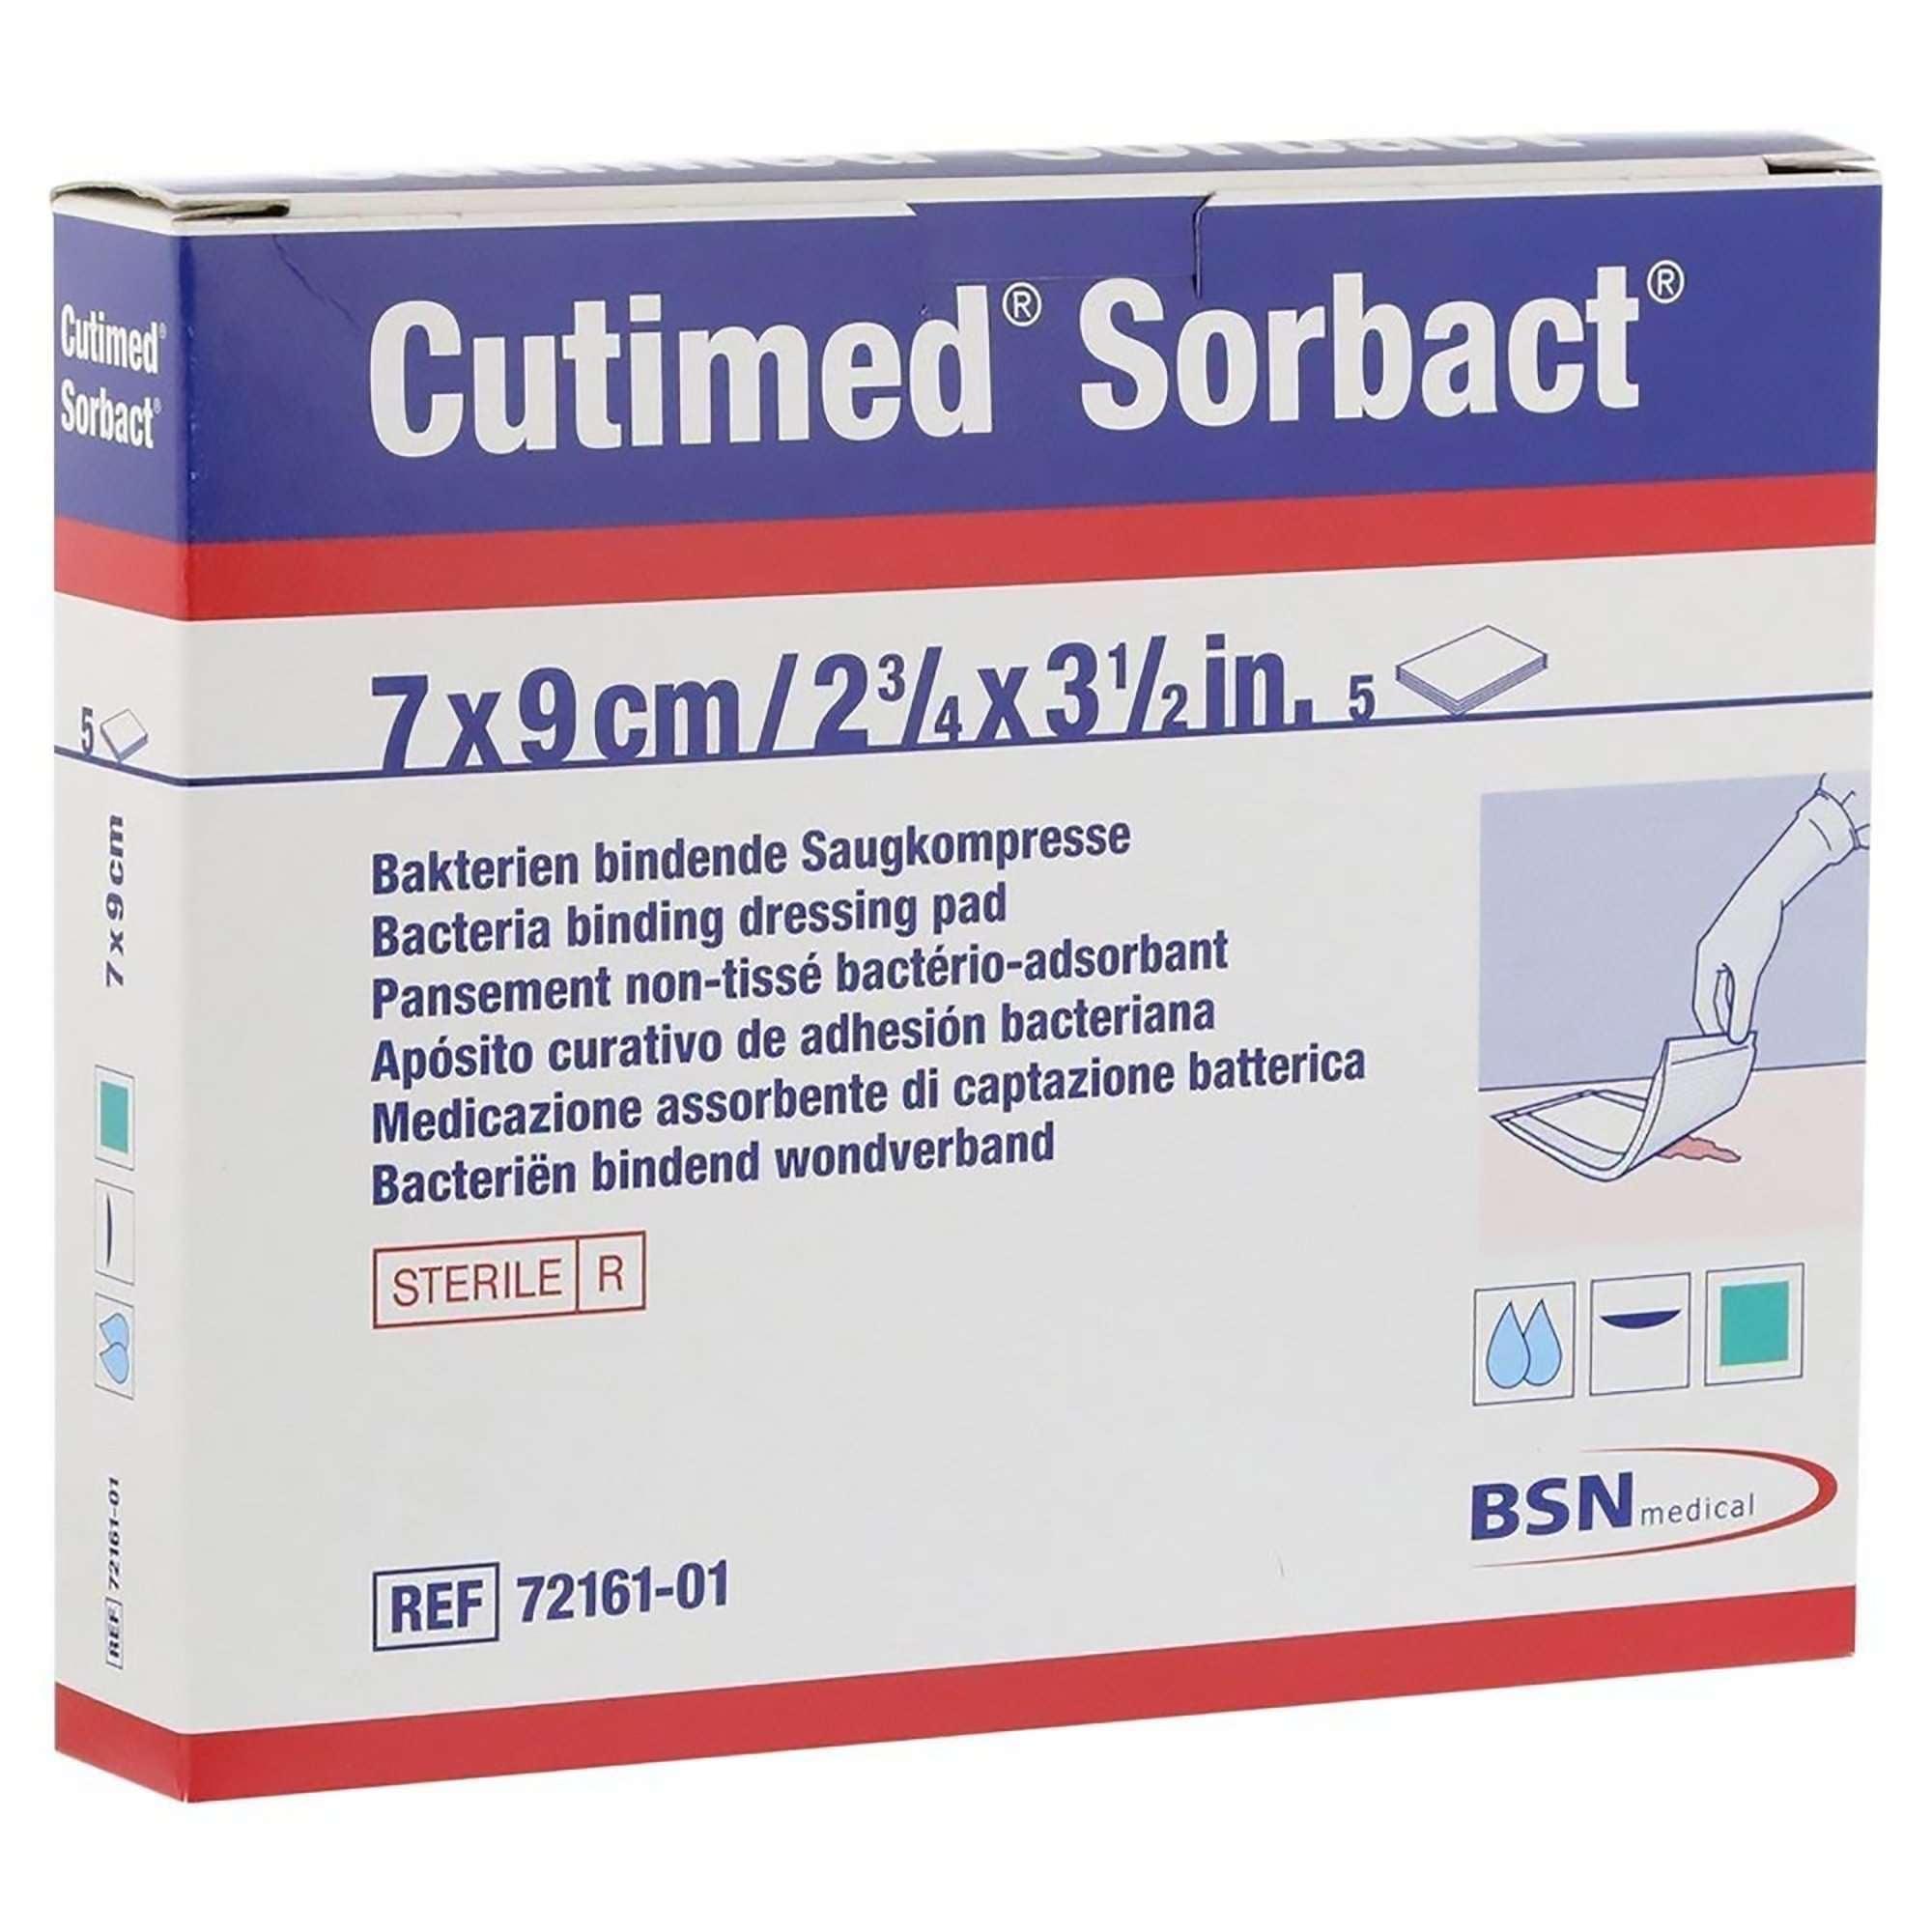 Cutimed Sorbact Antimicrobial Dressing, 2 ¾ x 3 ½ Inch, 5-pack - KatyMedSolutions